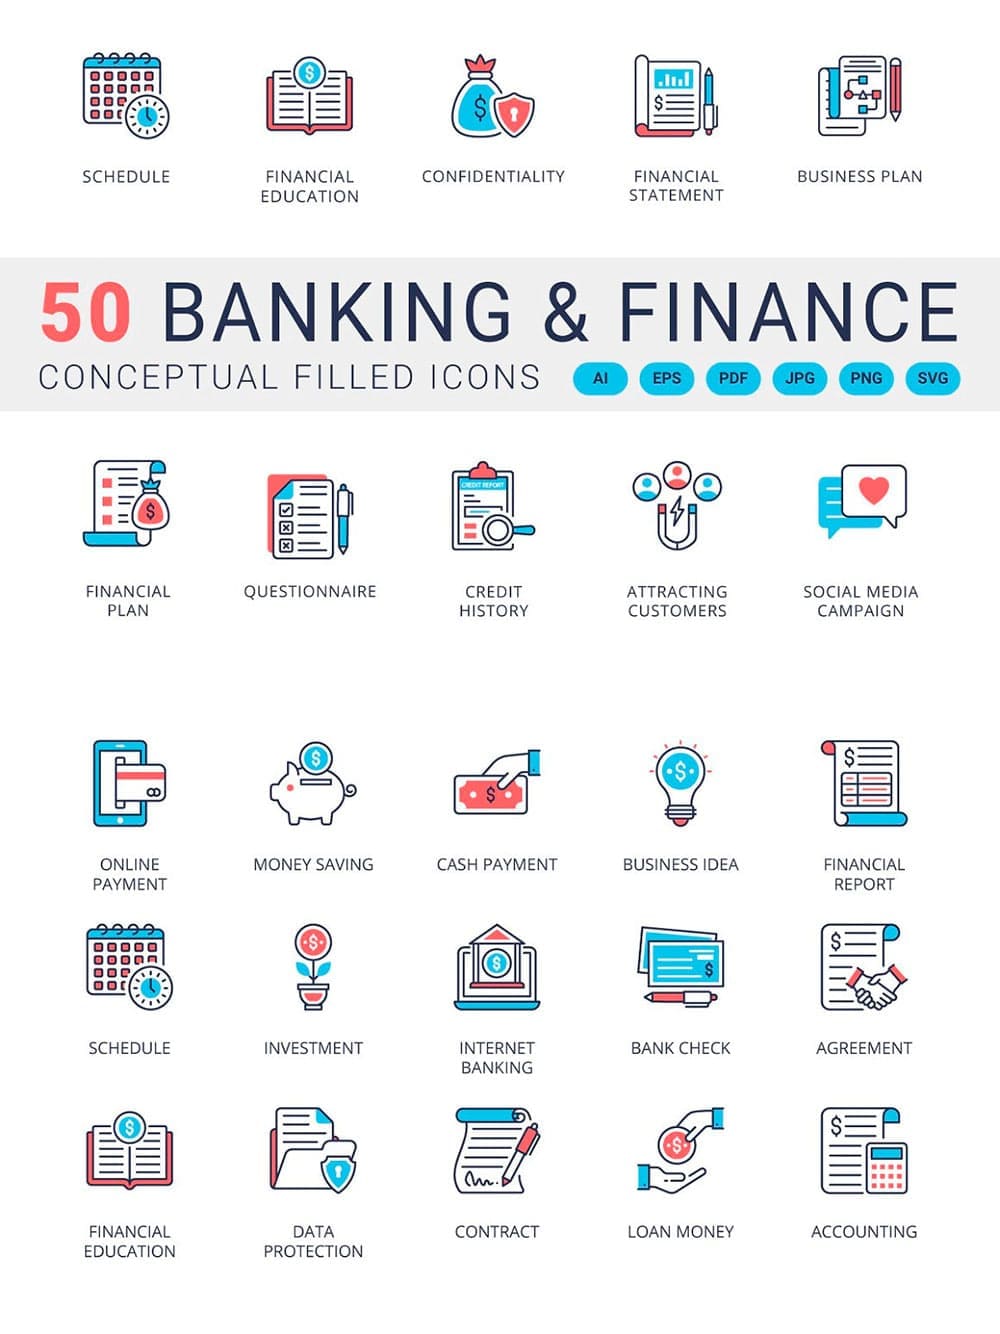 Banking finance, picture for pinterest.